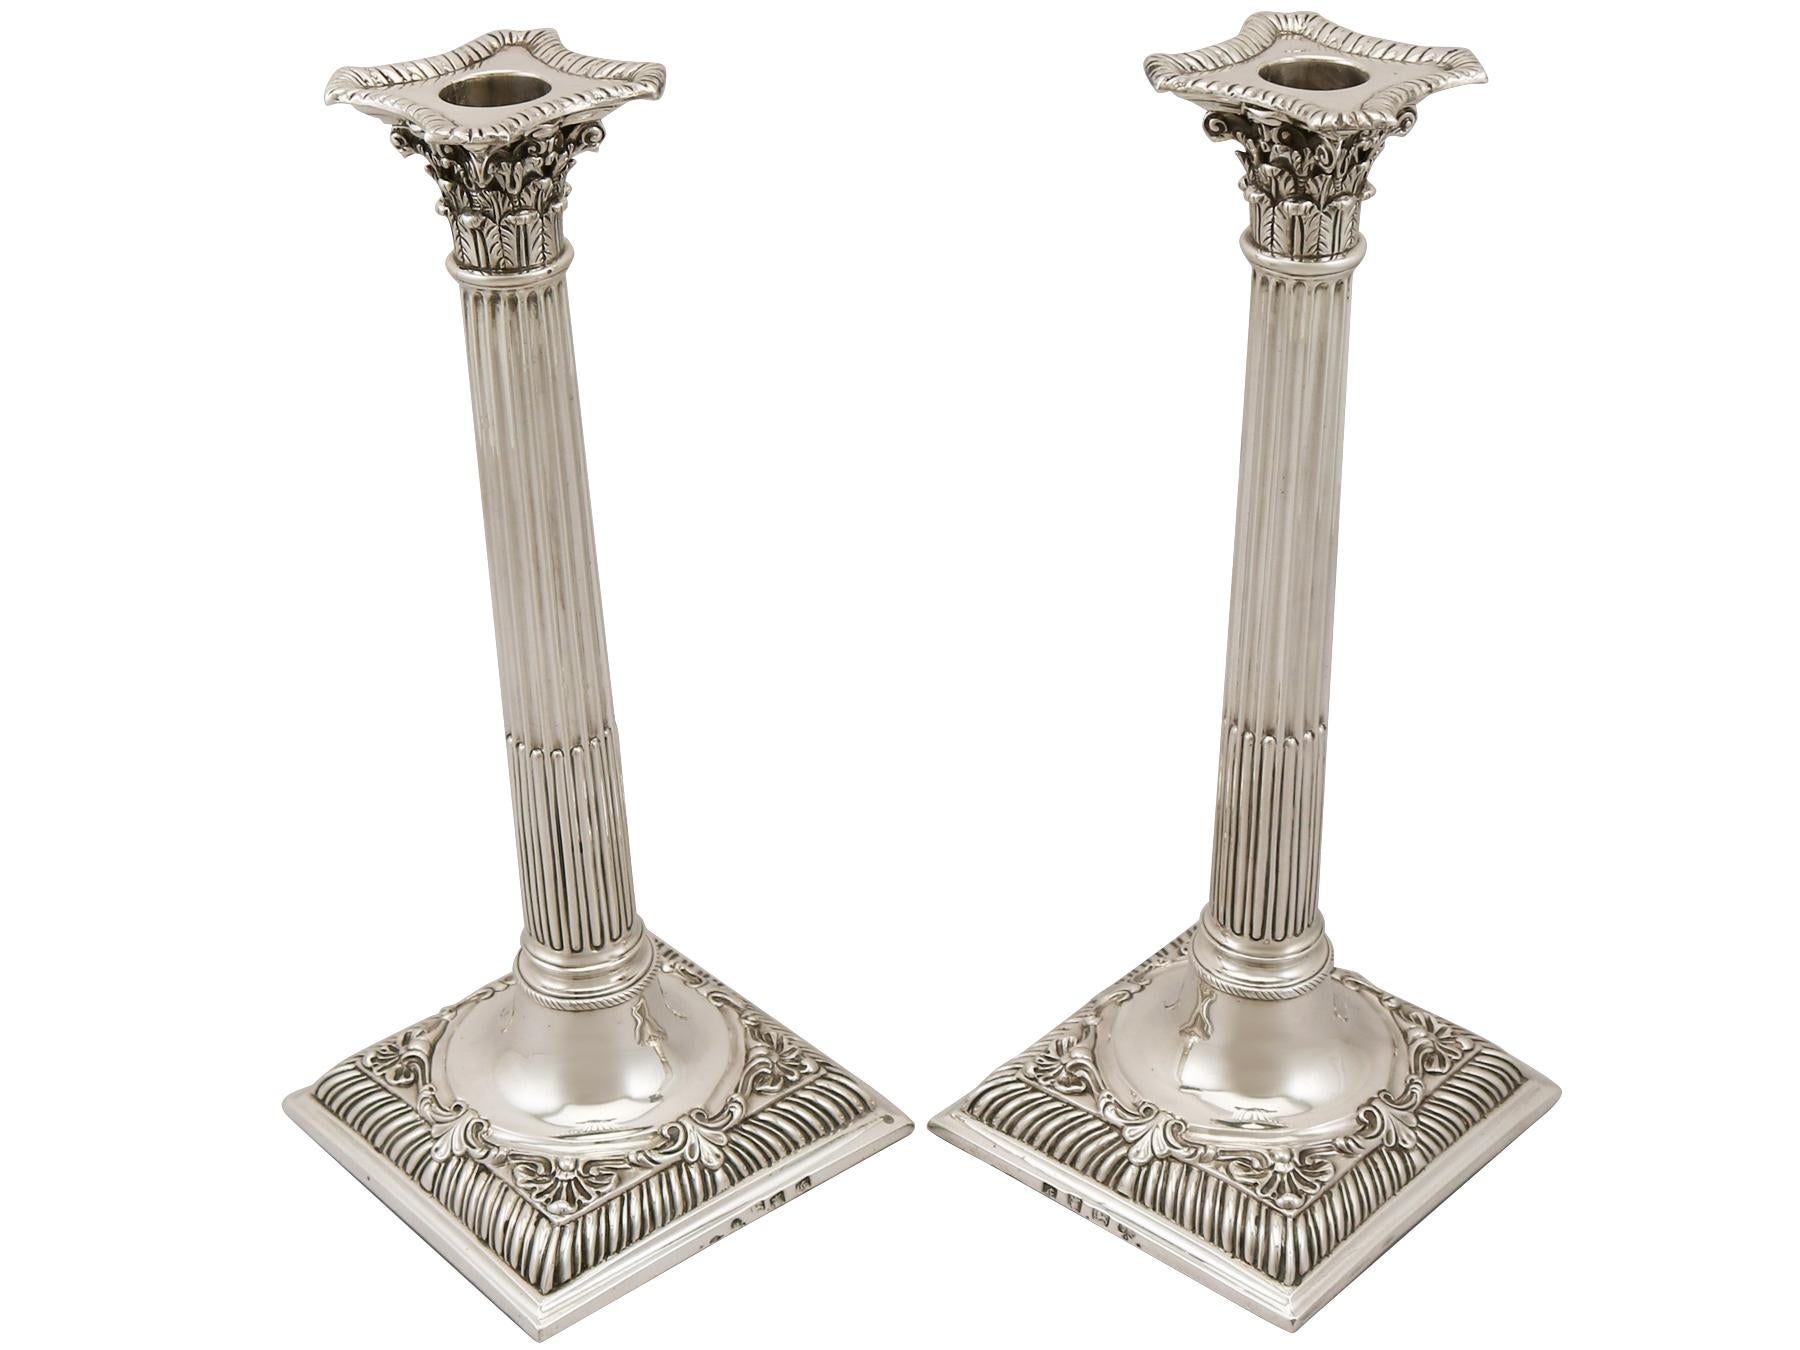 A fine and impressive pair of antique George III English sterling silver Corinthian column candlesticks, part of our ornamental Georgian silverware collection.

These fine antique George III sterling silver candlesticks have Corinthian columns to